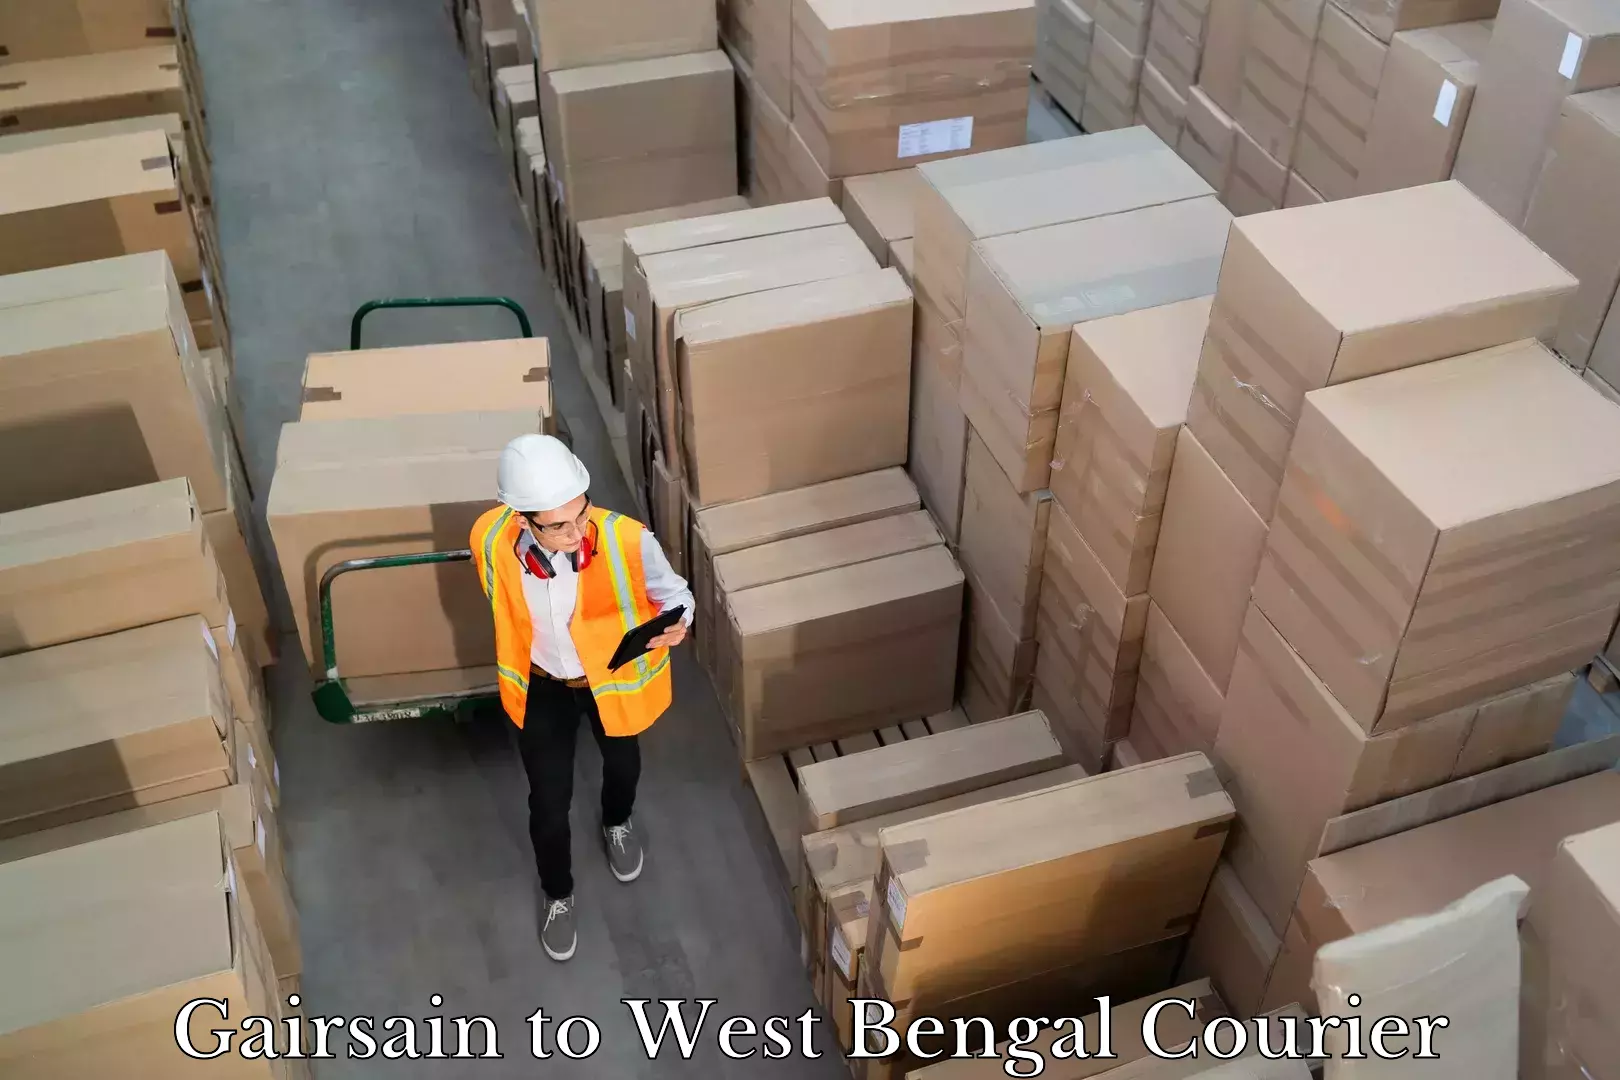 Courier service comparison in Gairsain to West Bengal